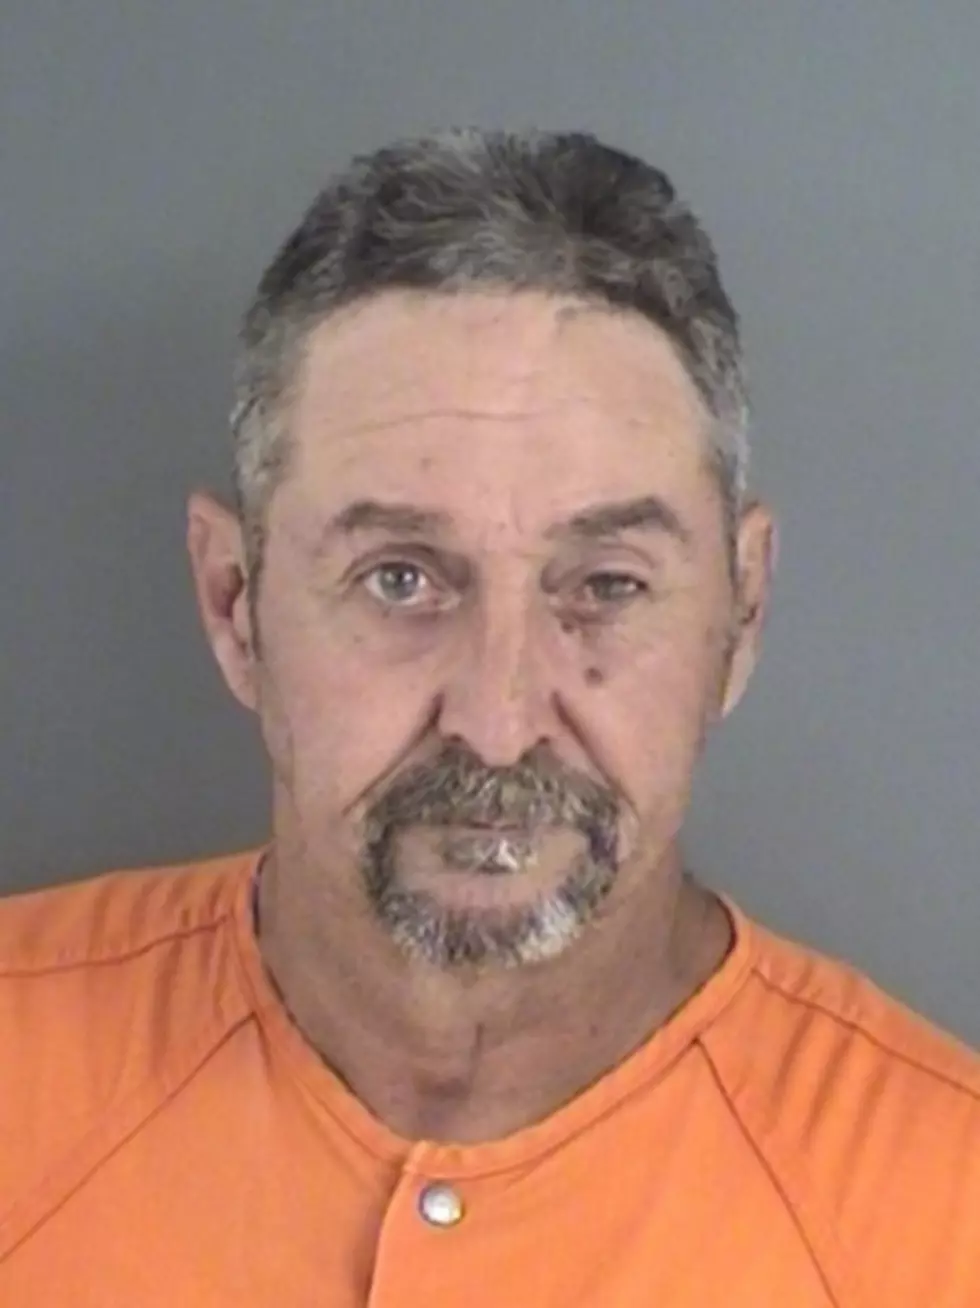 Man Arrested for Burglaries in Southern Angelina County